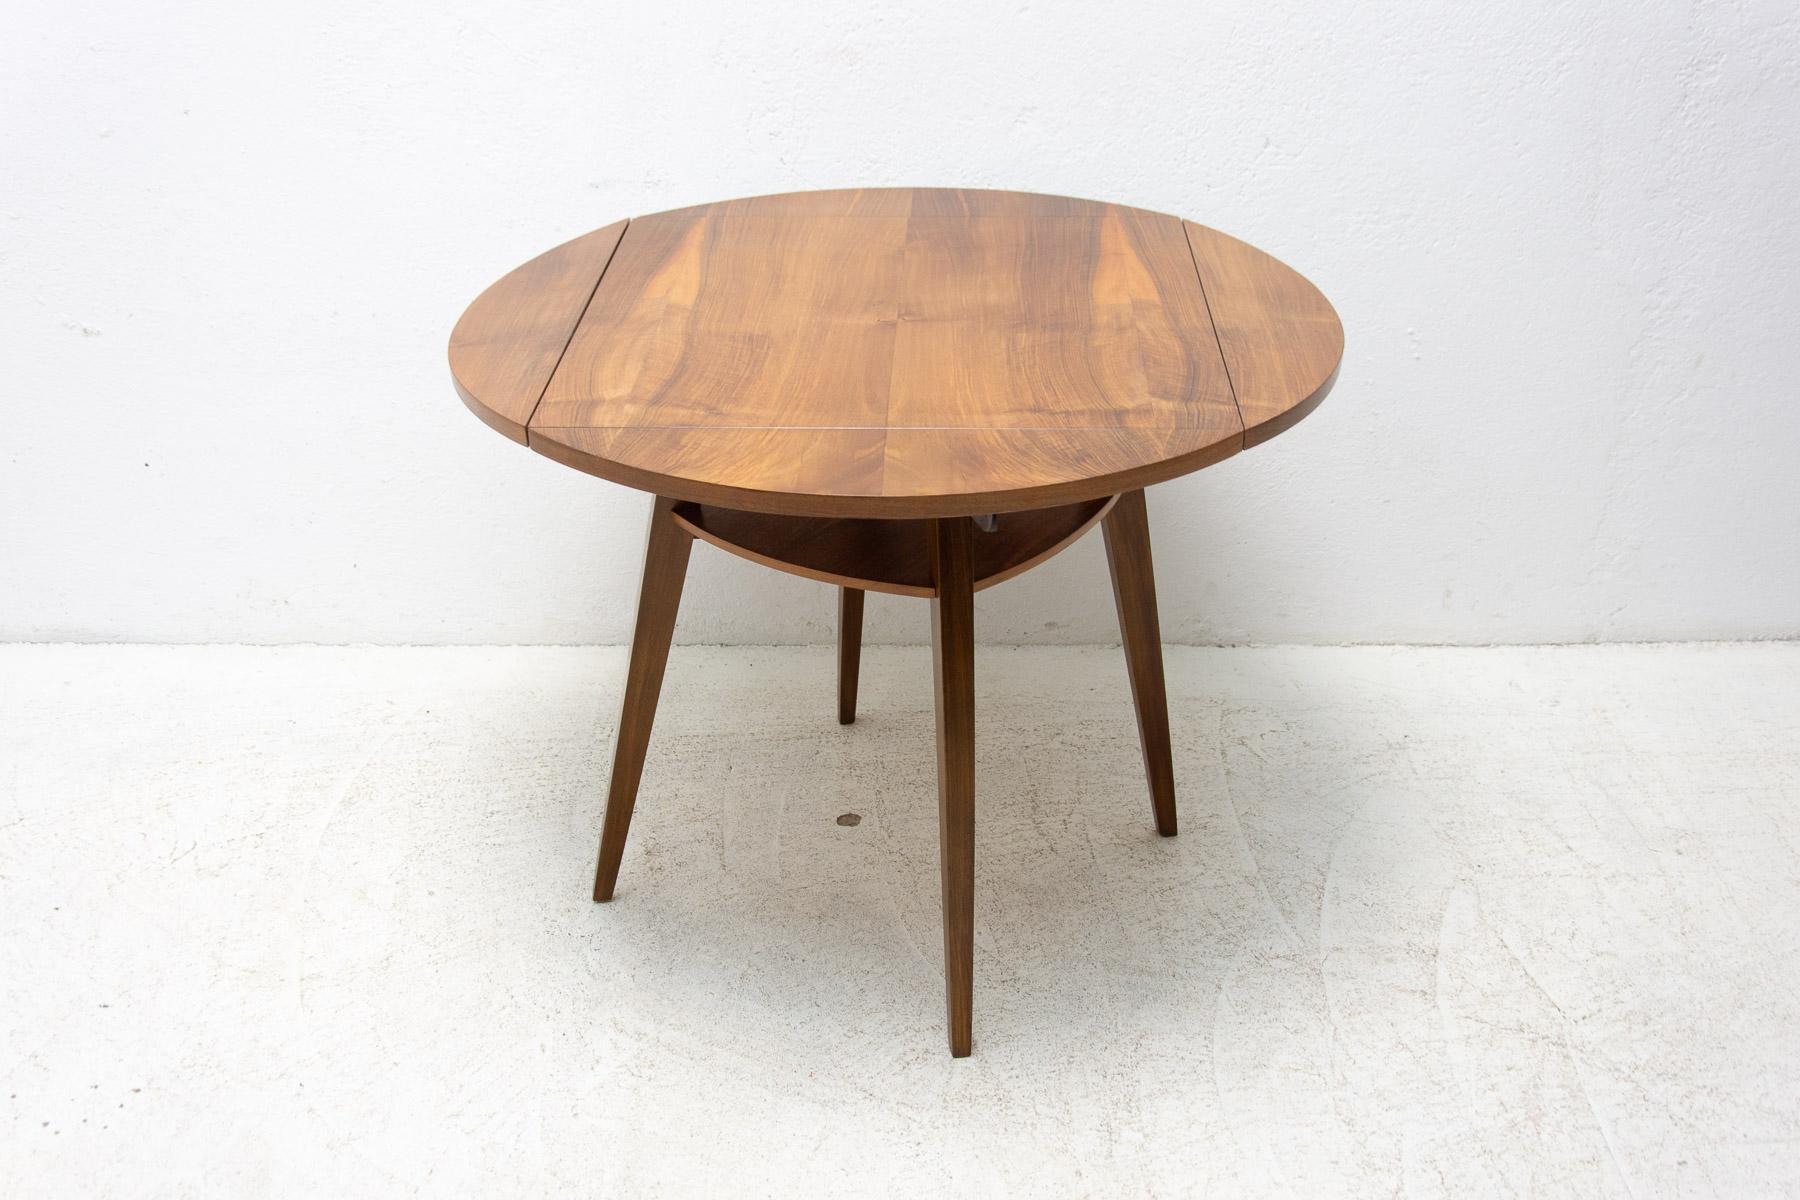 This table was made in the former Czechoslovakia in the 1950s. It is made of walnut wood and has an unusual and interesting design, which is designed so that the table can be folded and unfolded as needed.

It´s in excelent condition, fully